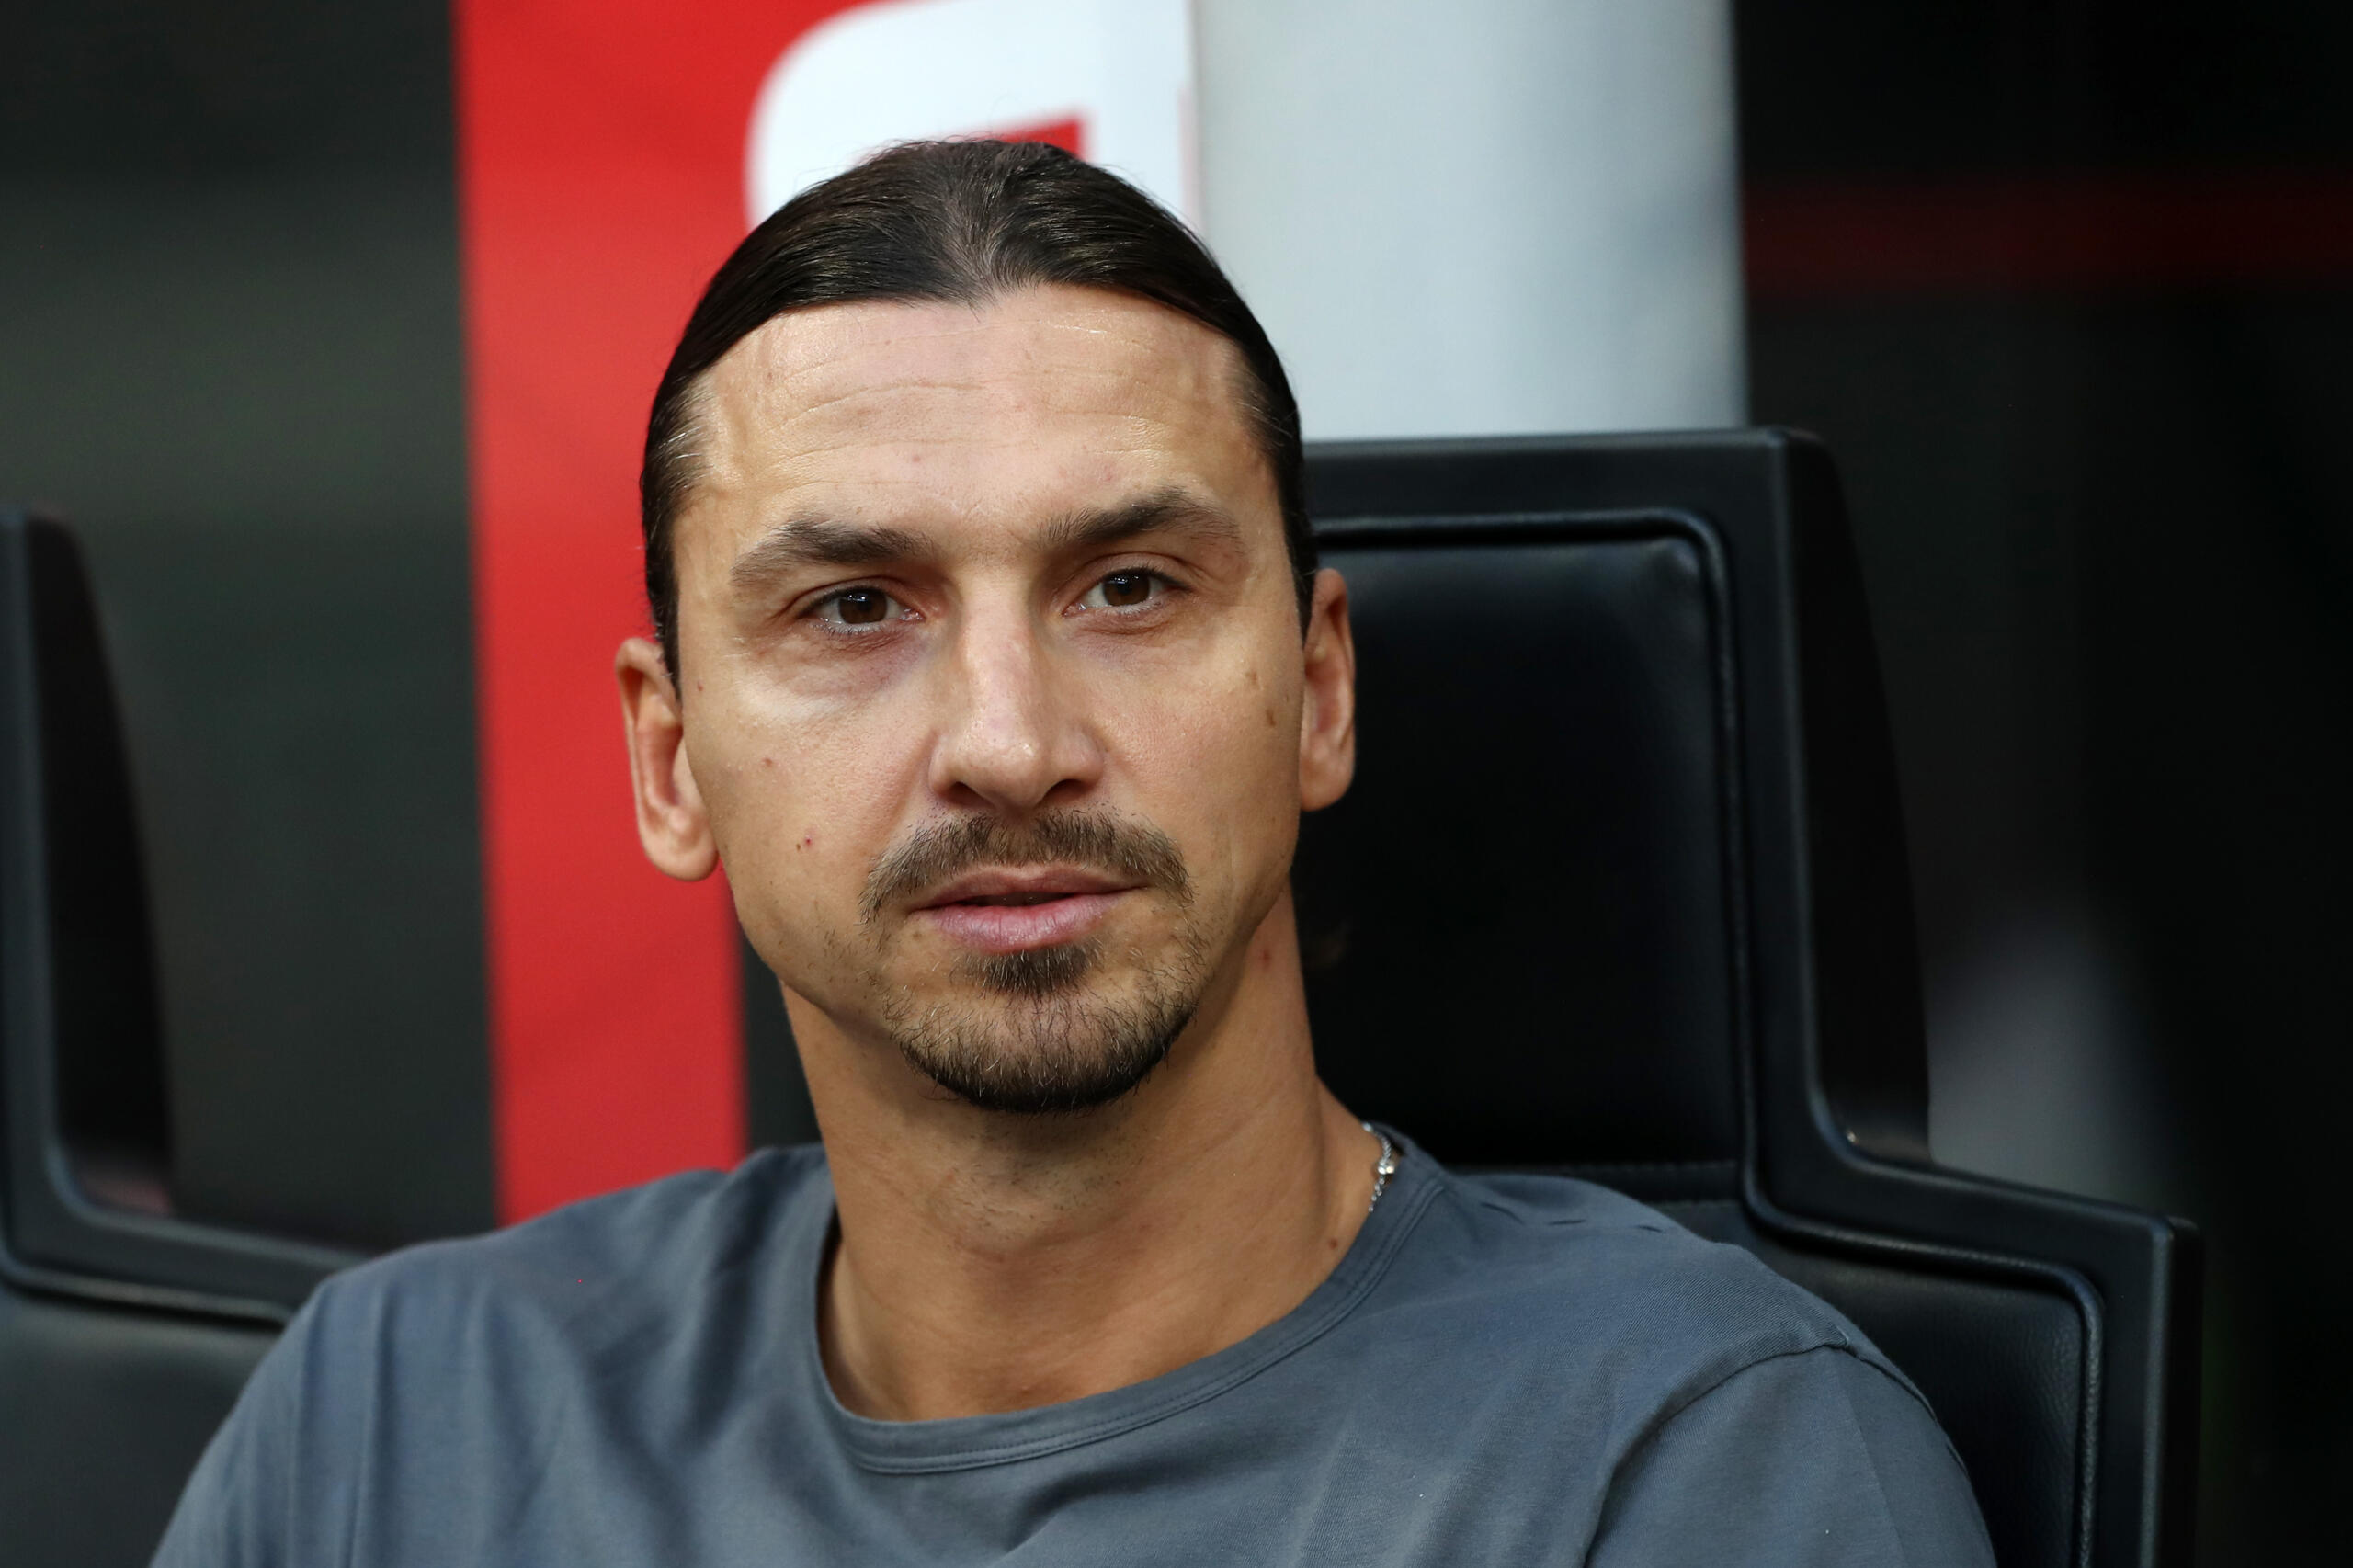 Milan were ready to hand Zlatan Ibrahimovic a new contract after his goal versus Udinese and a couple of encouraging performances.